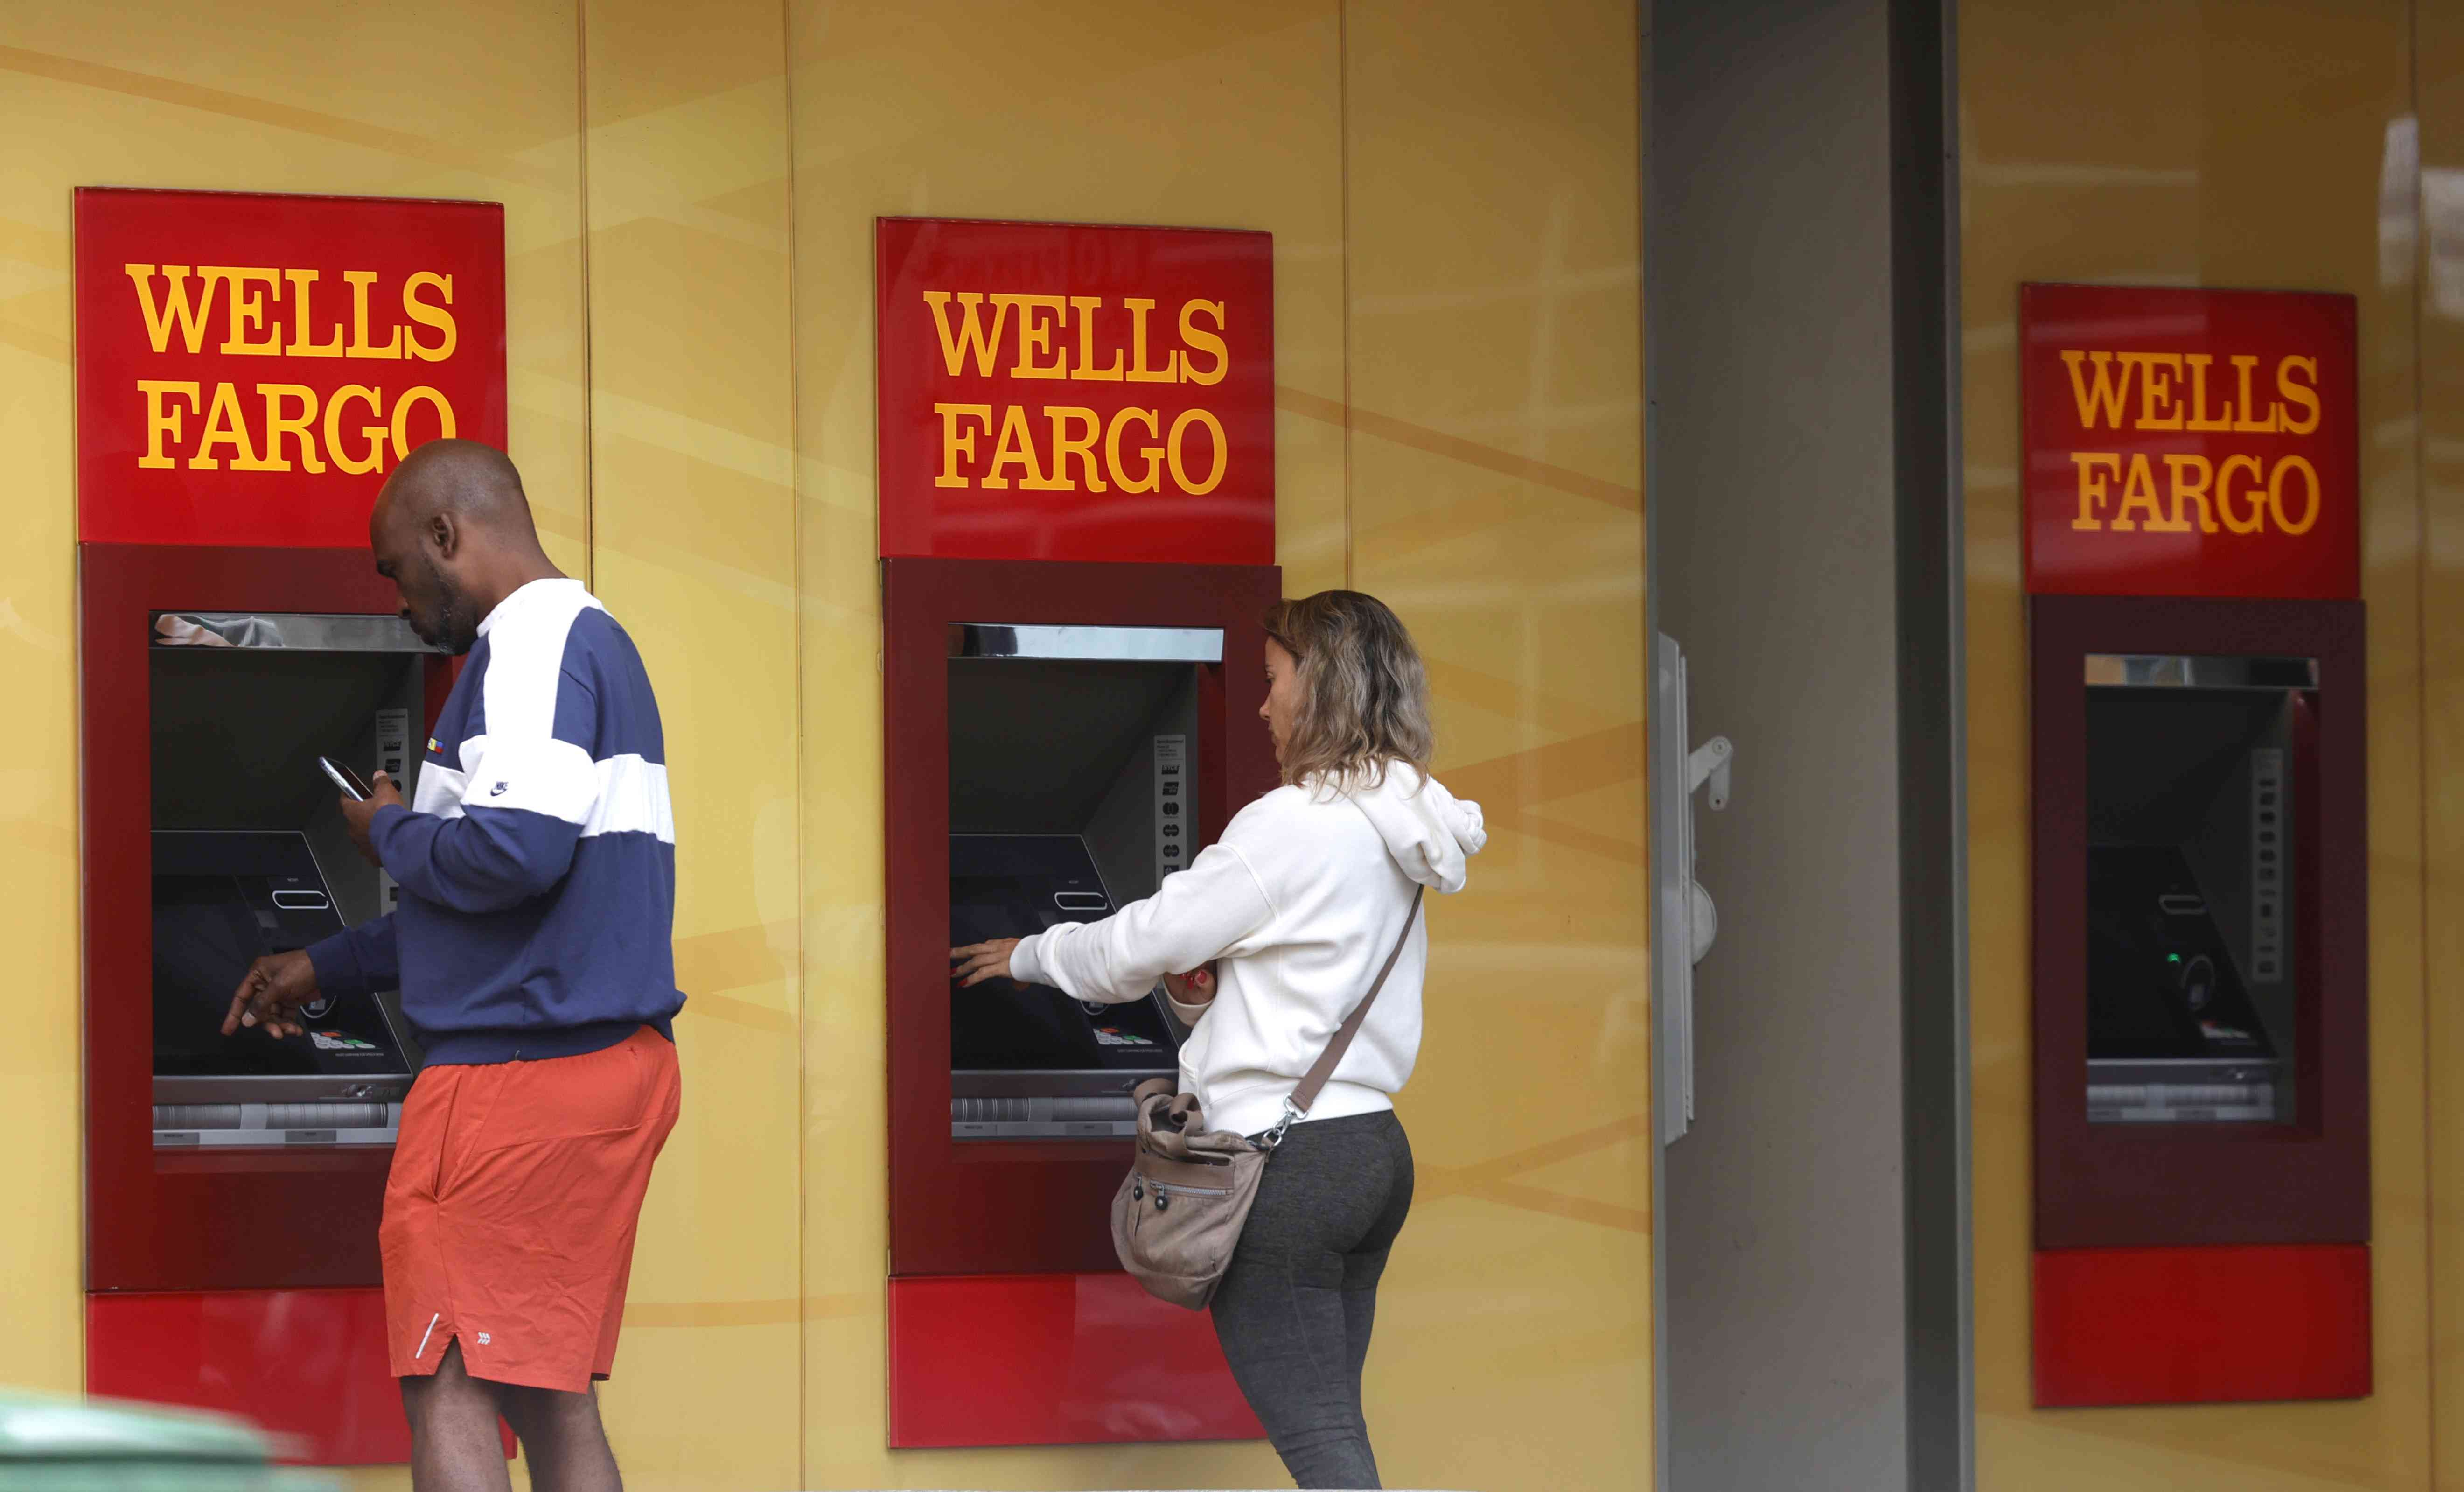 Wells Fargo customers use ATMs outside of a Wells Fargo bank on July 14, 2021 in San Francisco, California.